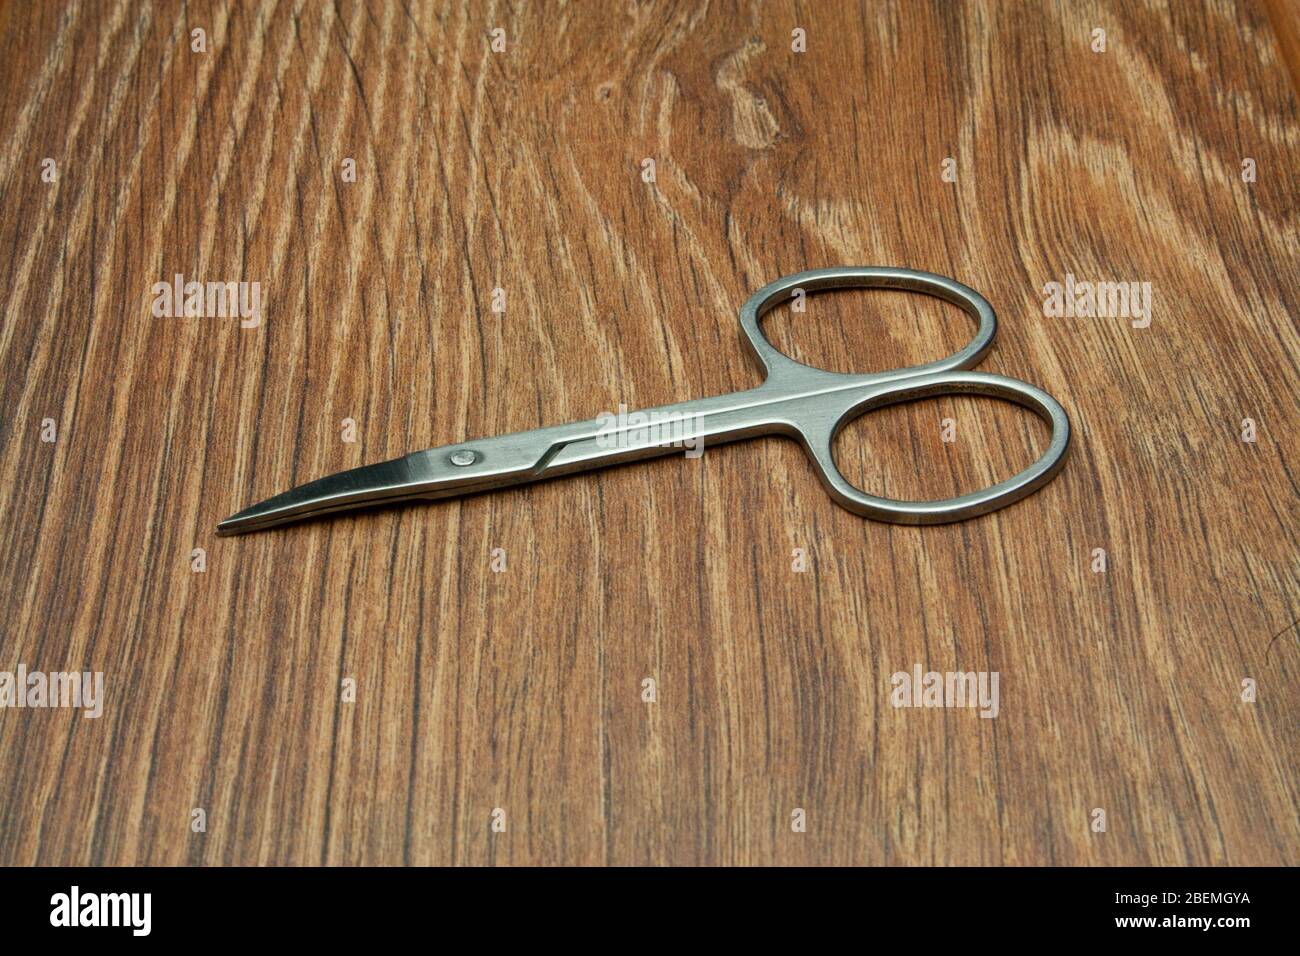 Close-up manicure scissors isolated on wooden background Stock Photo